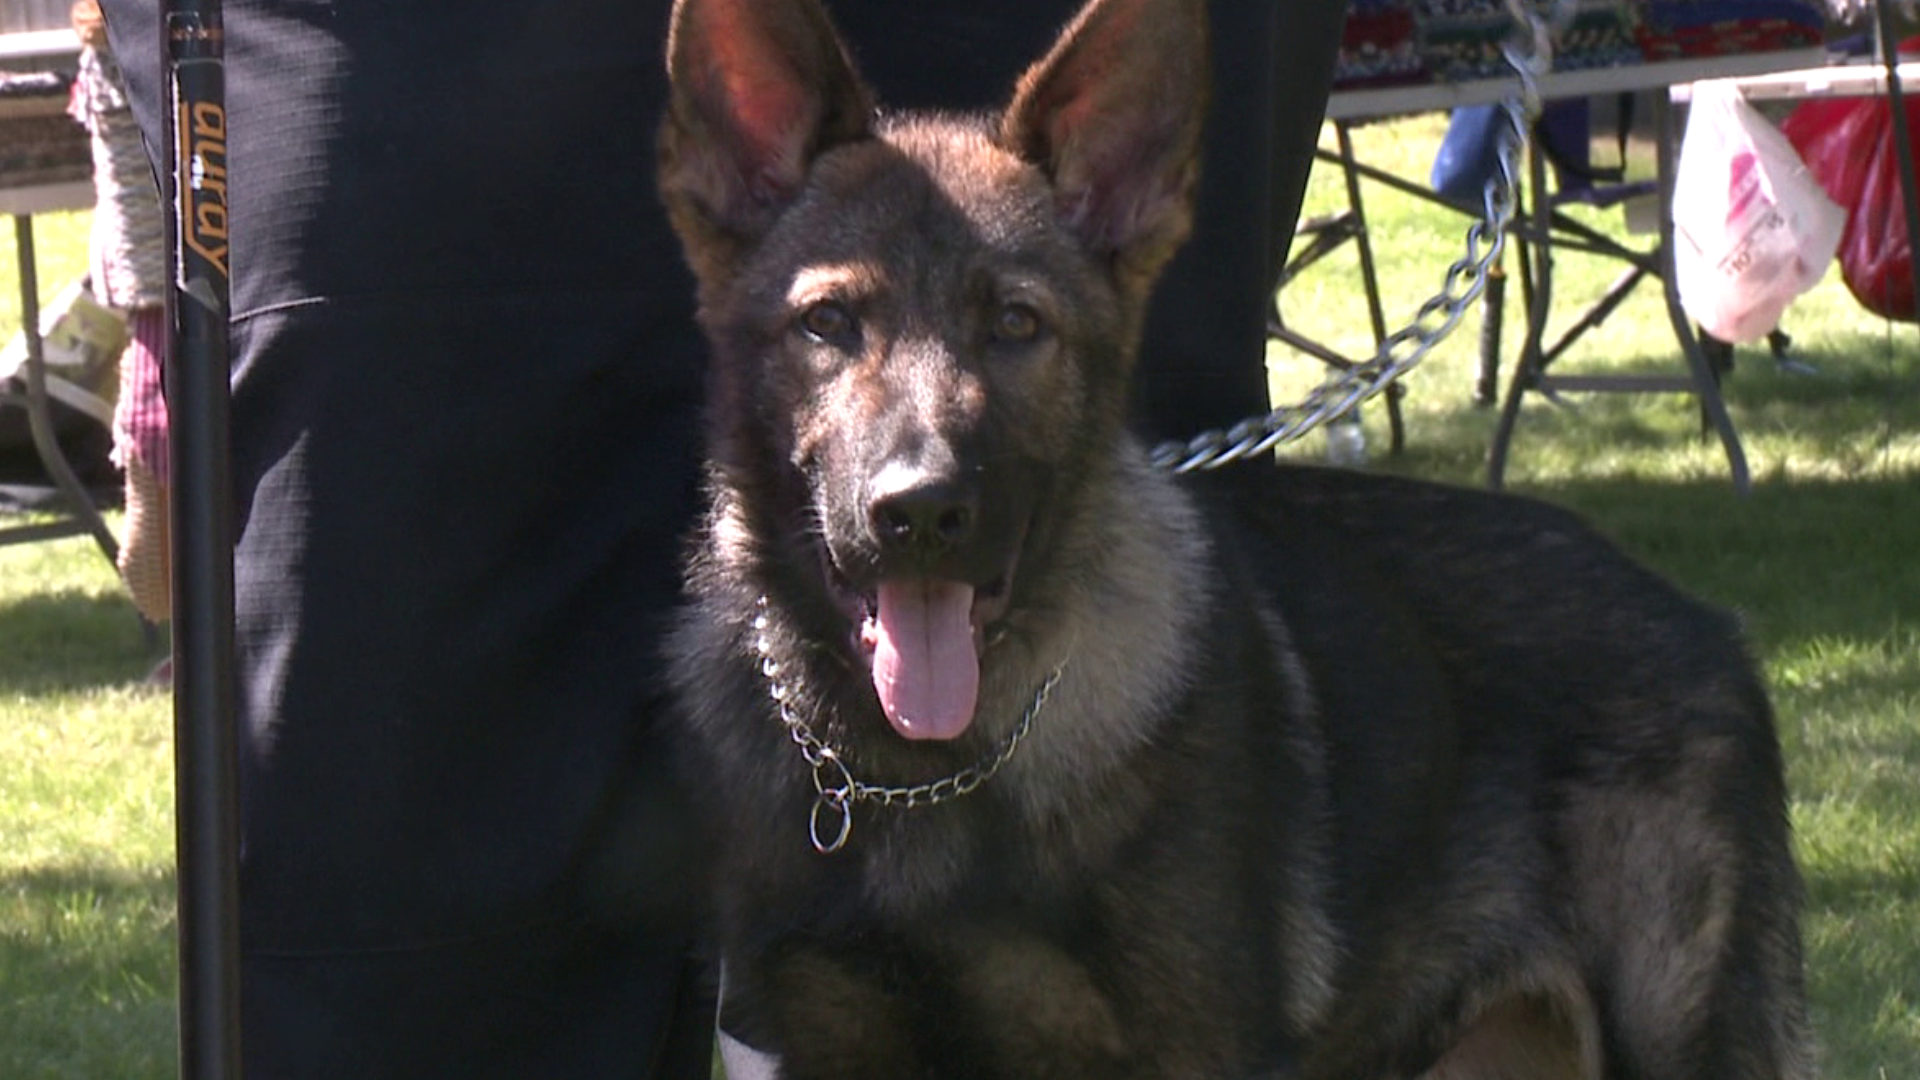 The money raised will go towards Jax's training, which will cost the department thousands of dollars.